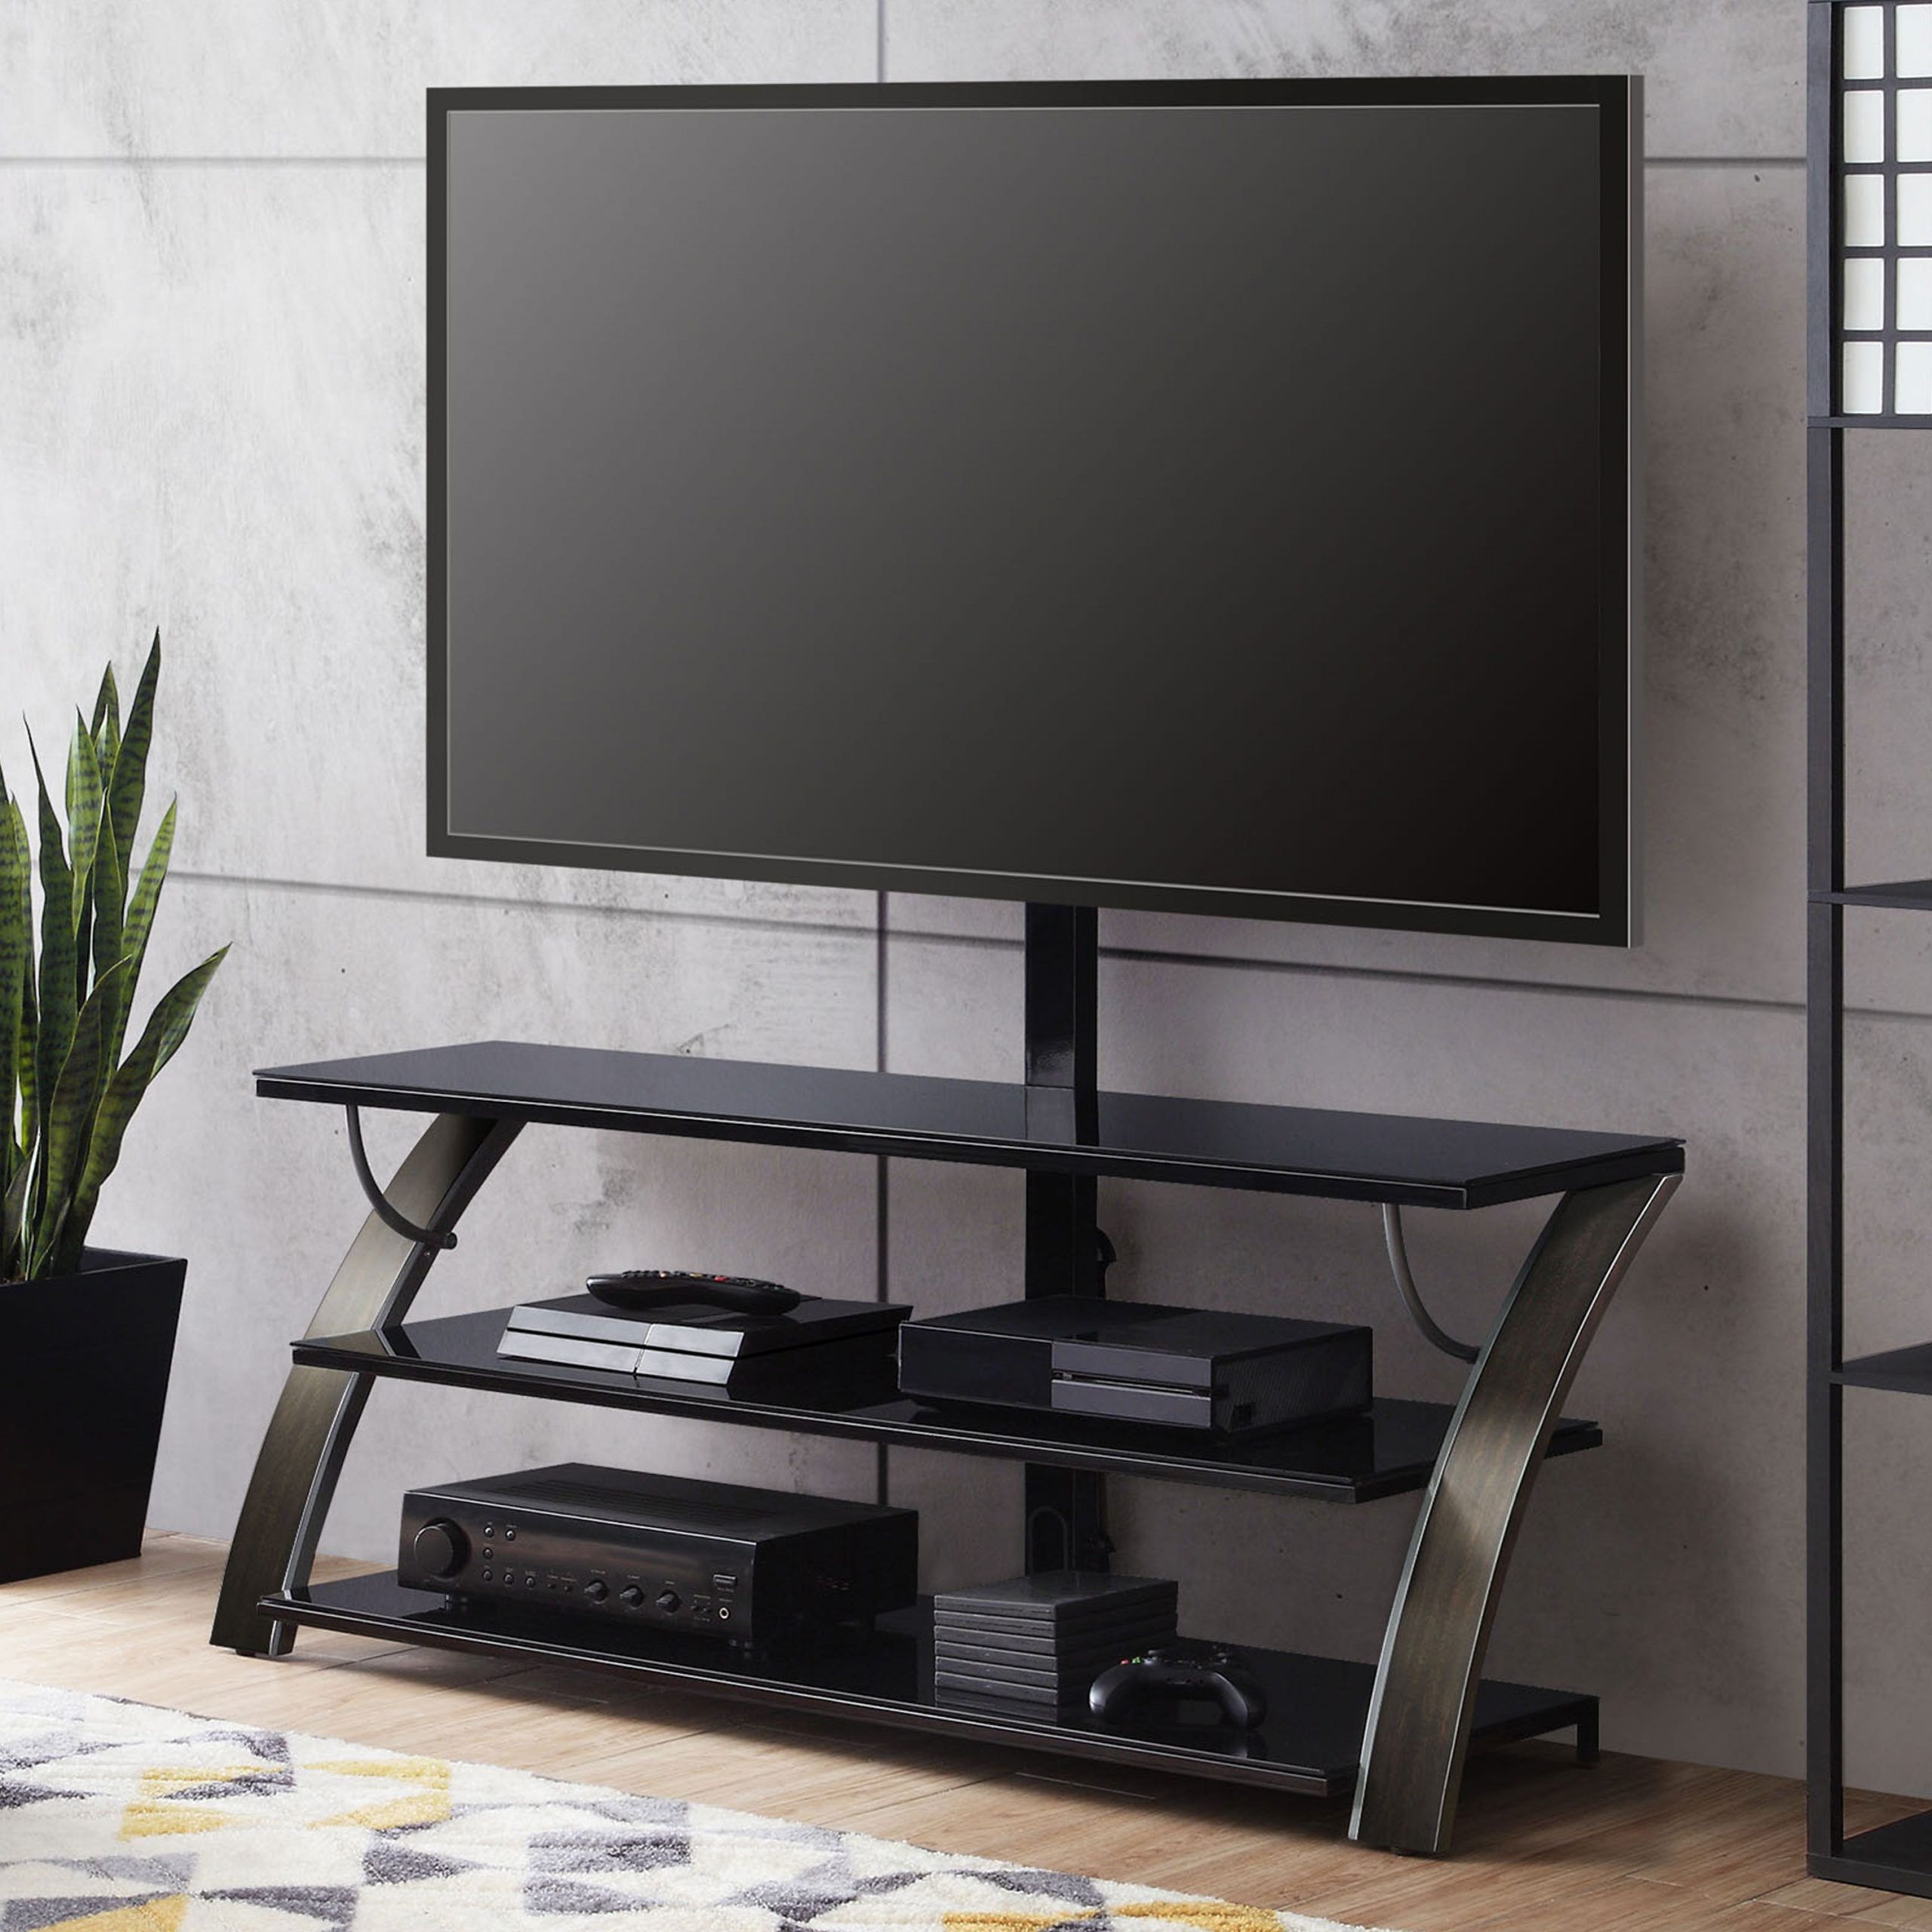 Whalen Payton 3 In 1 Flat Panel Tv Stand For Tvs Up To 65 In Fashionable Aaric Tv Stands For Tvs Up To 65" (View 10 of 20)